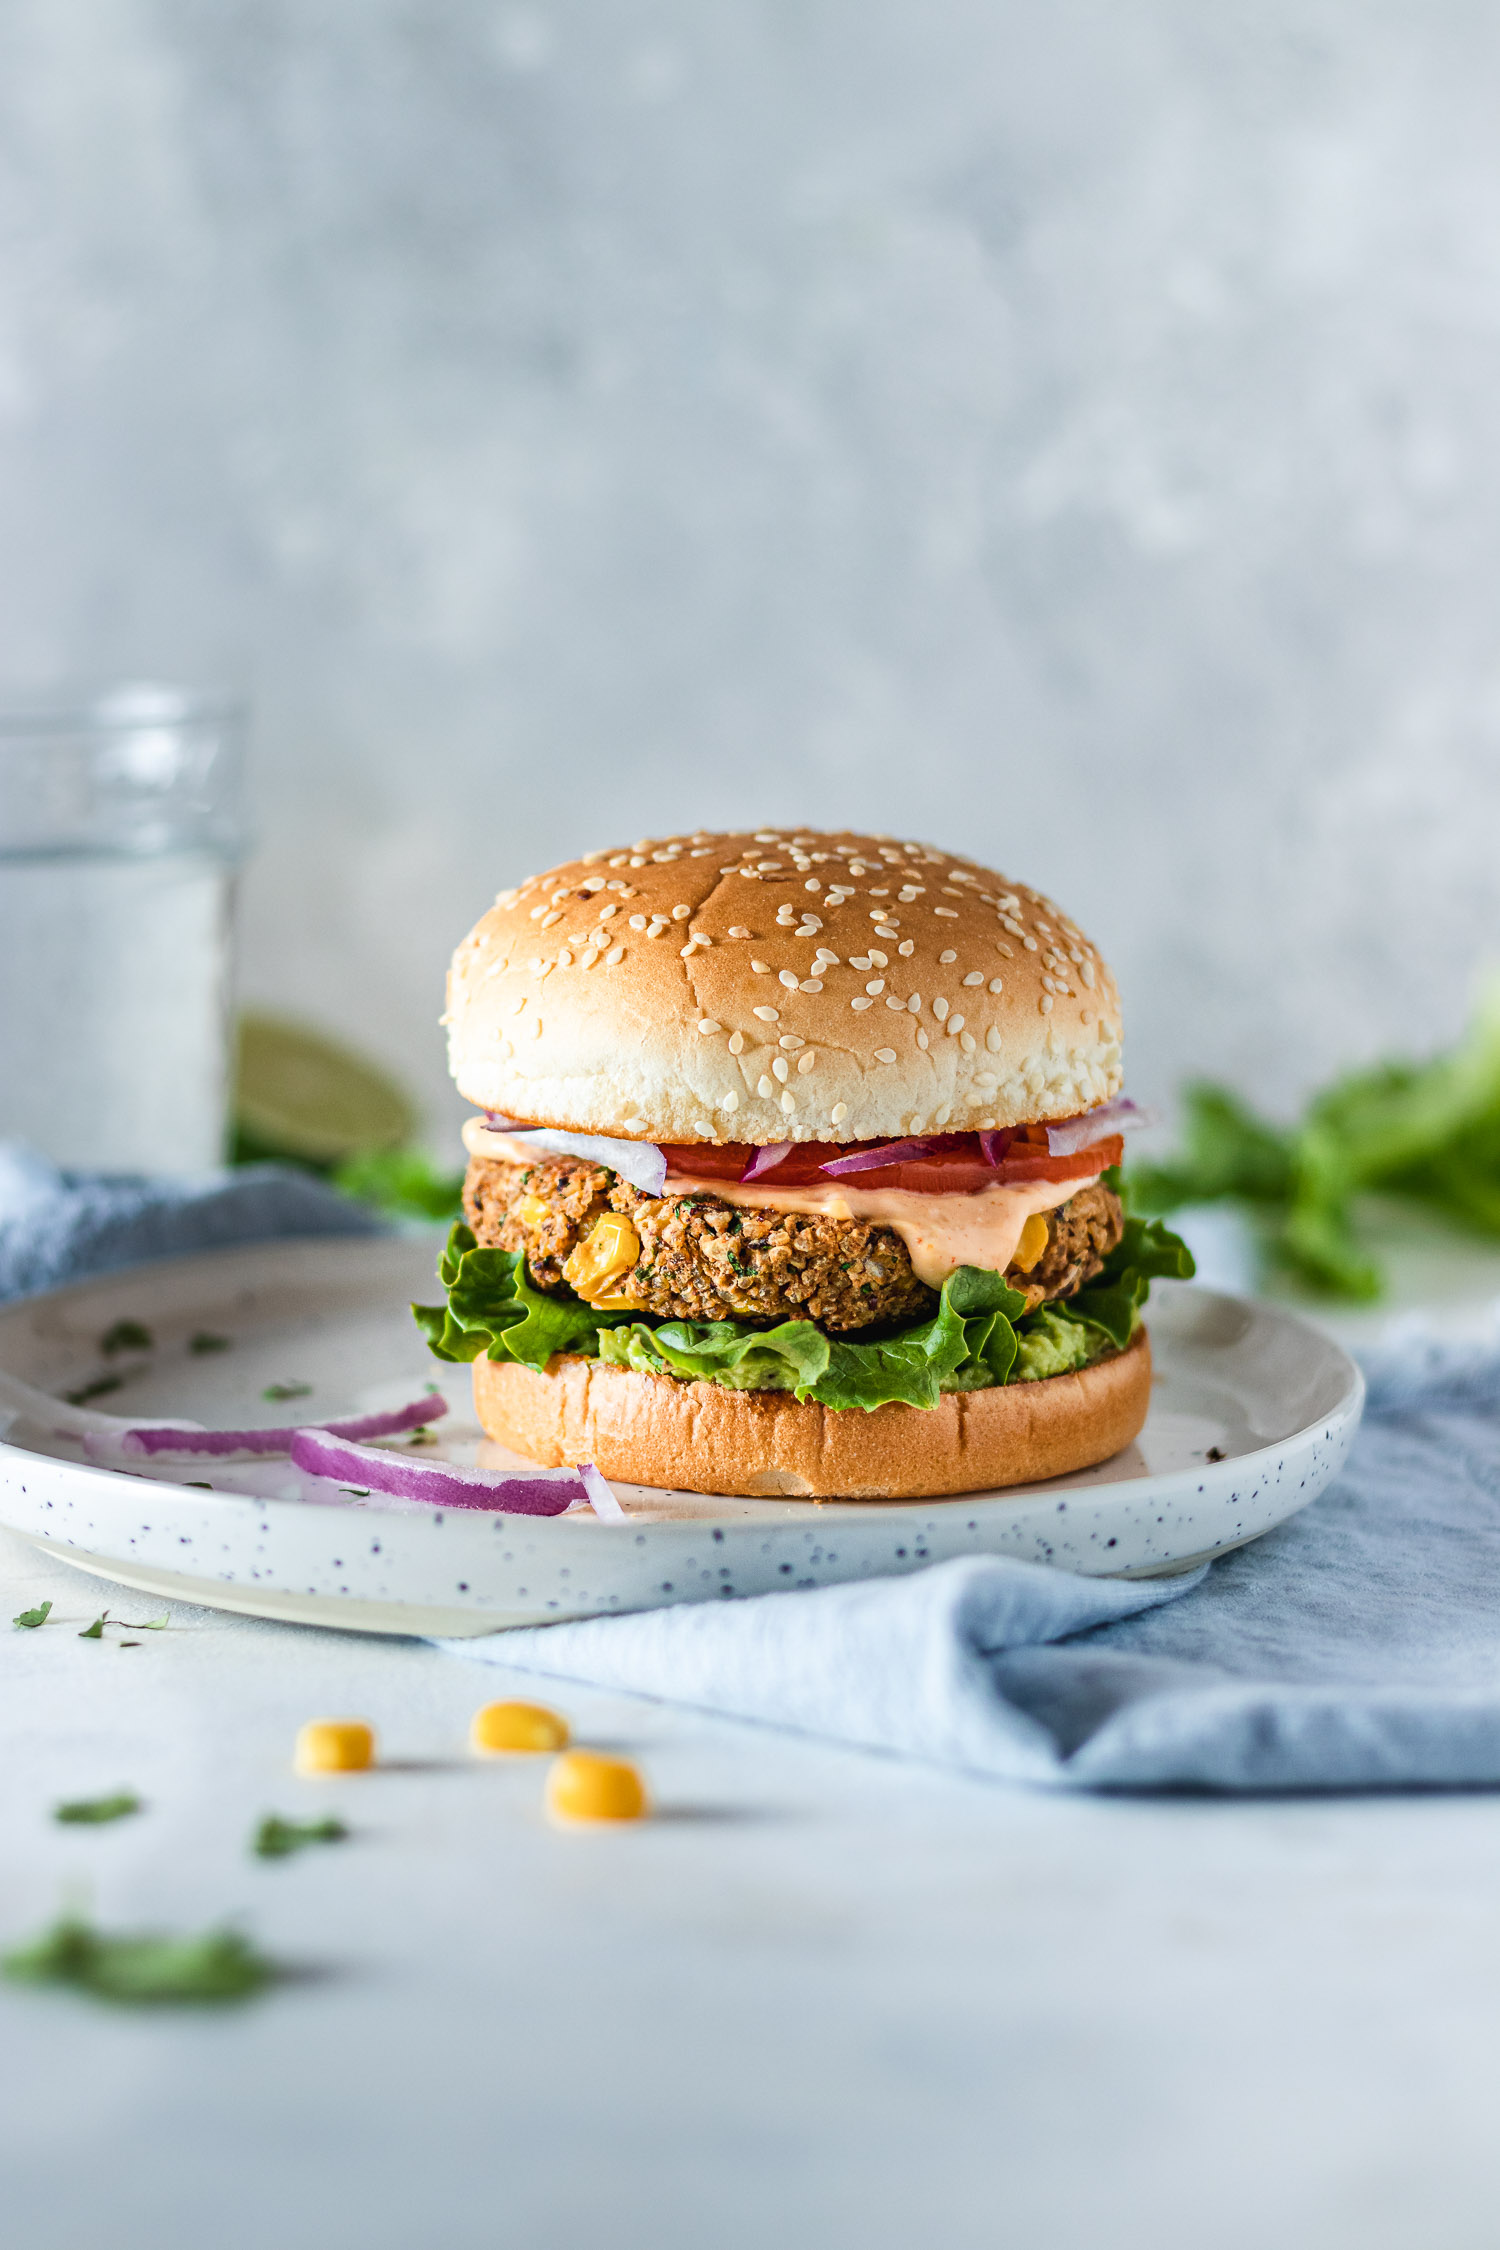 Veggie burger on a plate surrounded by chickpeas, slices of onion, lettuce, a glass of water and half a lime.